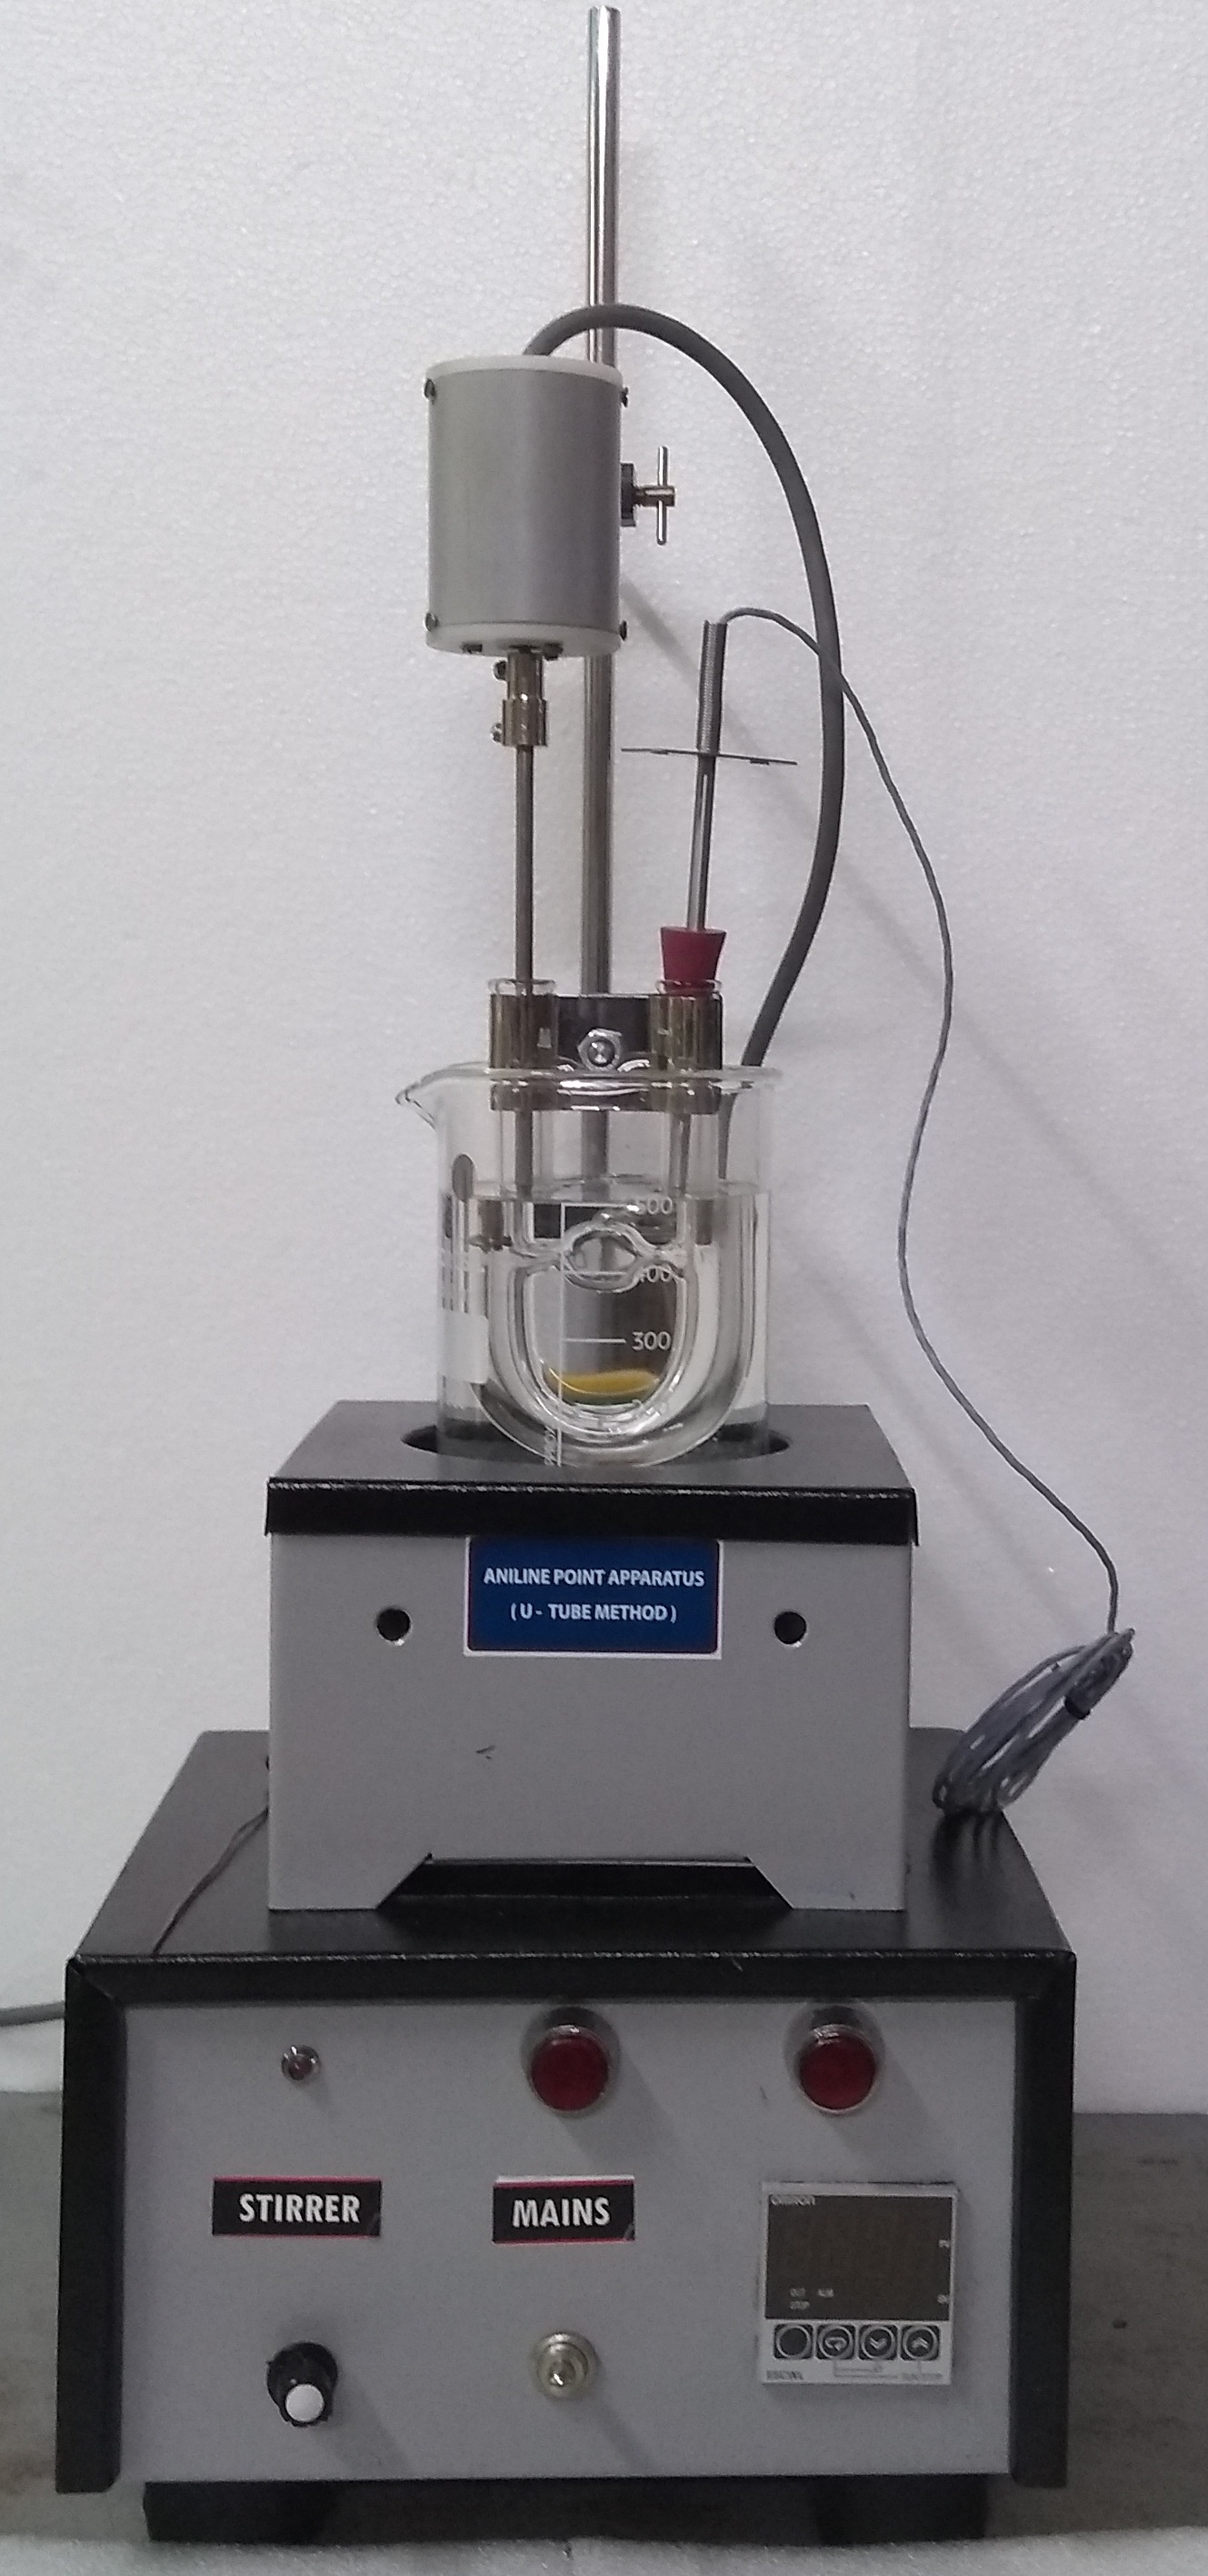 ANILINE POINT APPARATUS-METHOD D-WITH MOTORIZED STIRRER